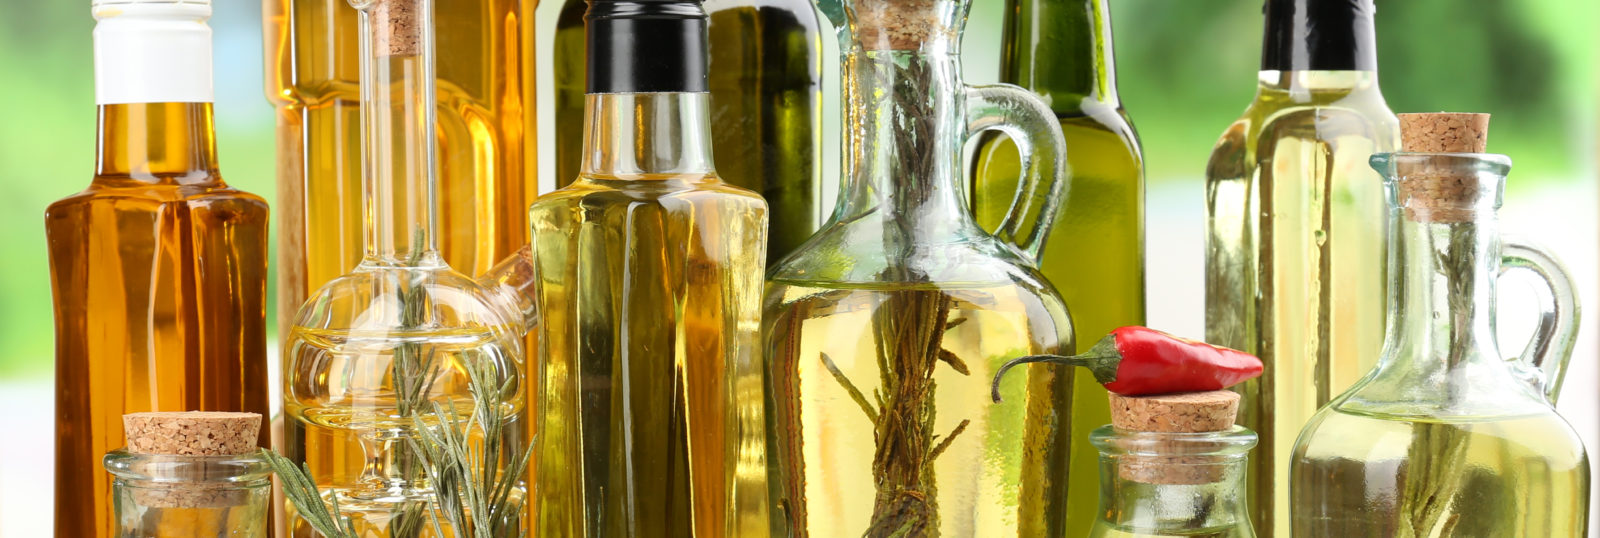 Forget the Fads: 4 Kinds of Cooking Oil is All You Need | Articles ...